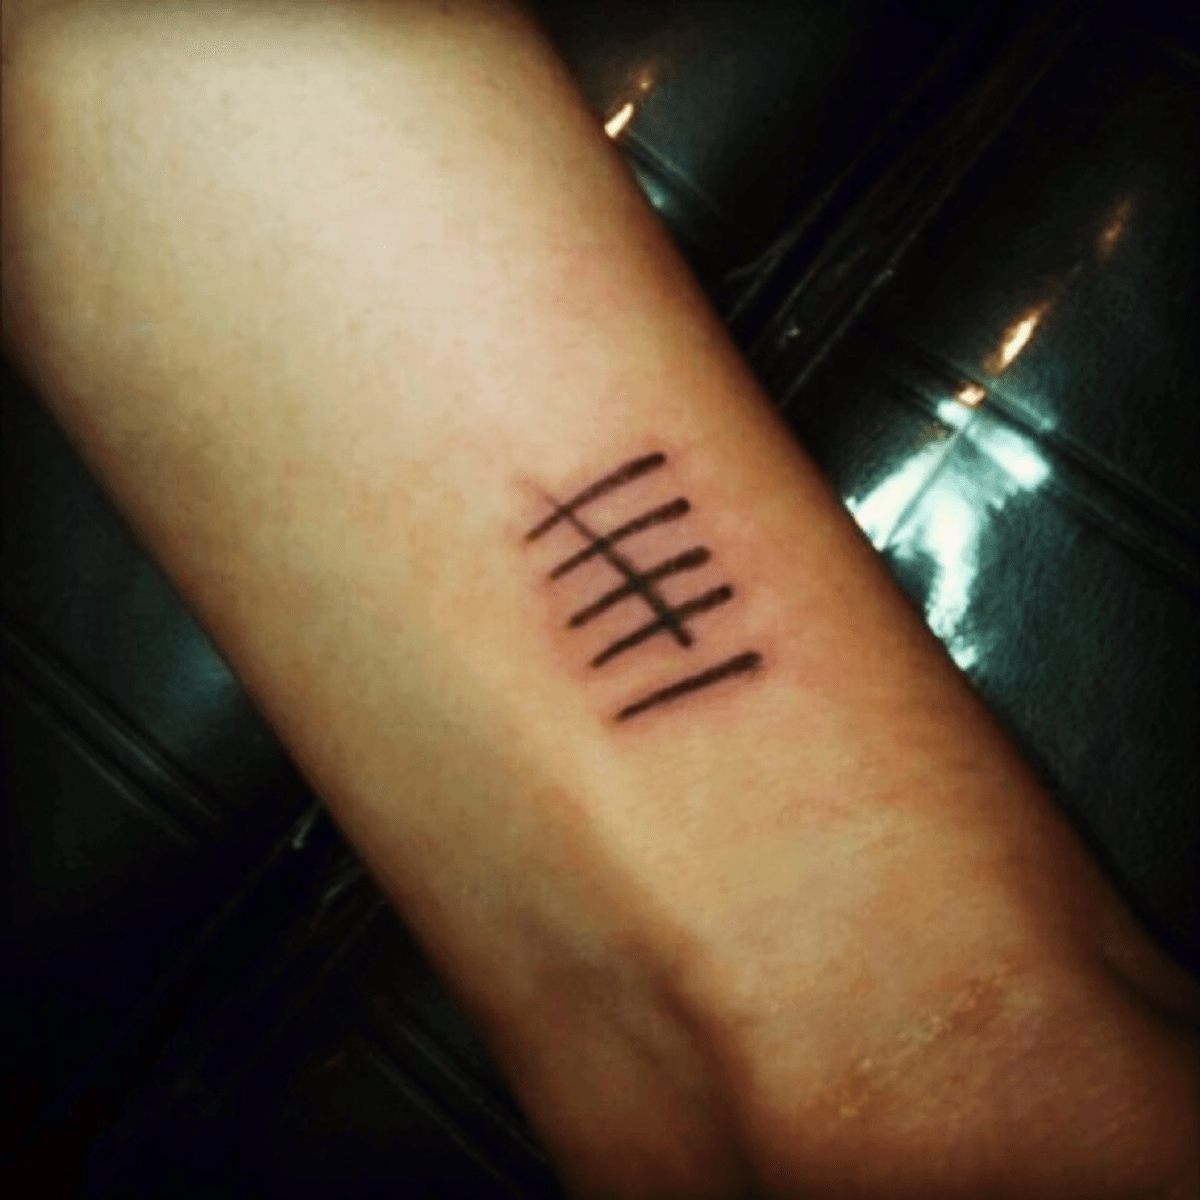 Tattoo uploaded by Vivian • Doctor Who - Silence tatoo #dw #doctorwho  #whovian #silence • Tattoodo